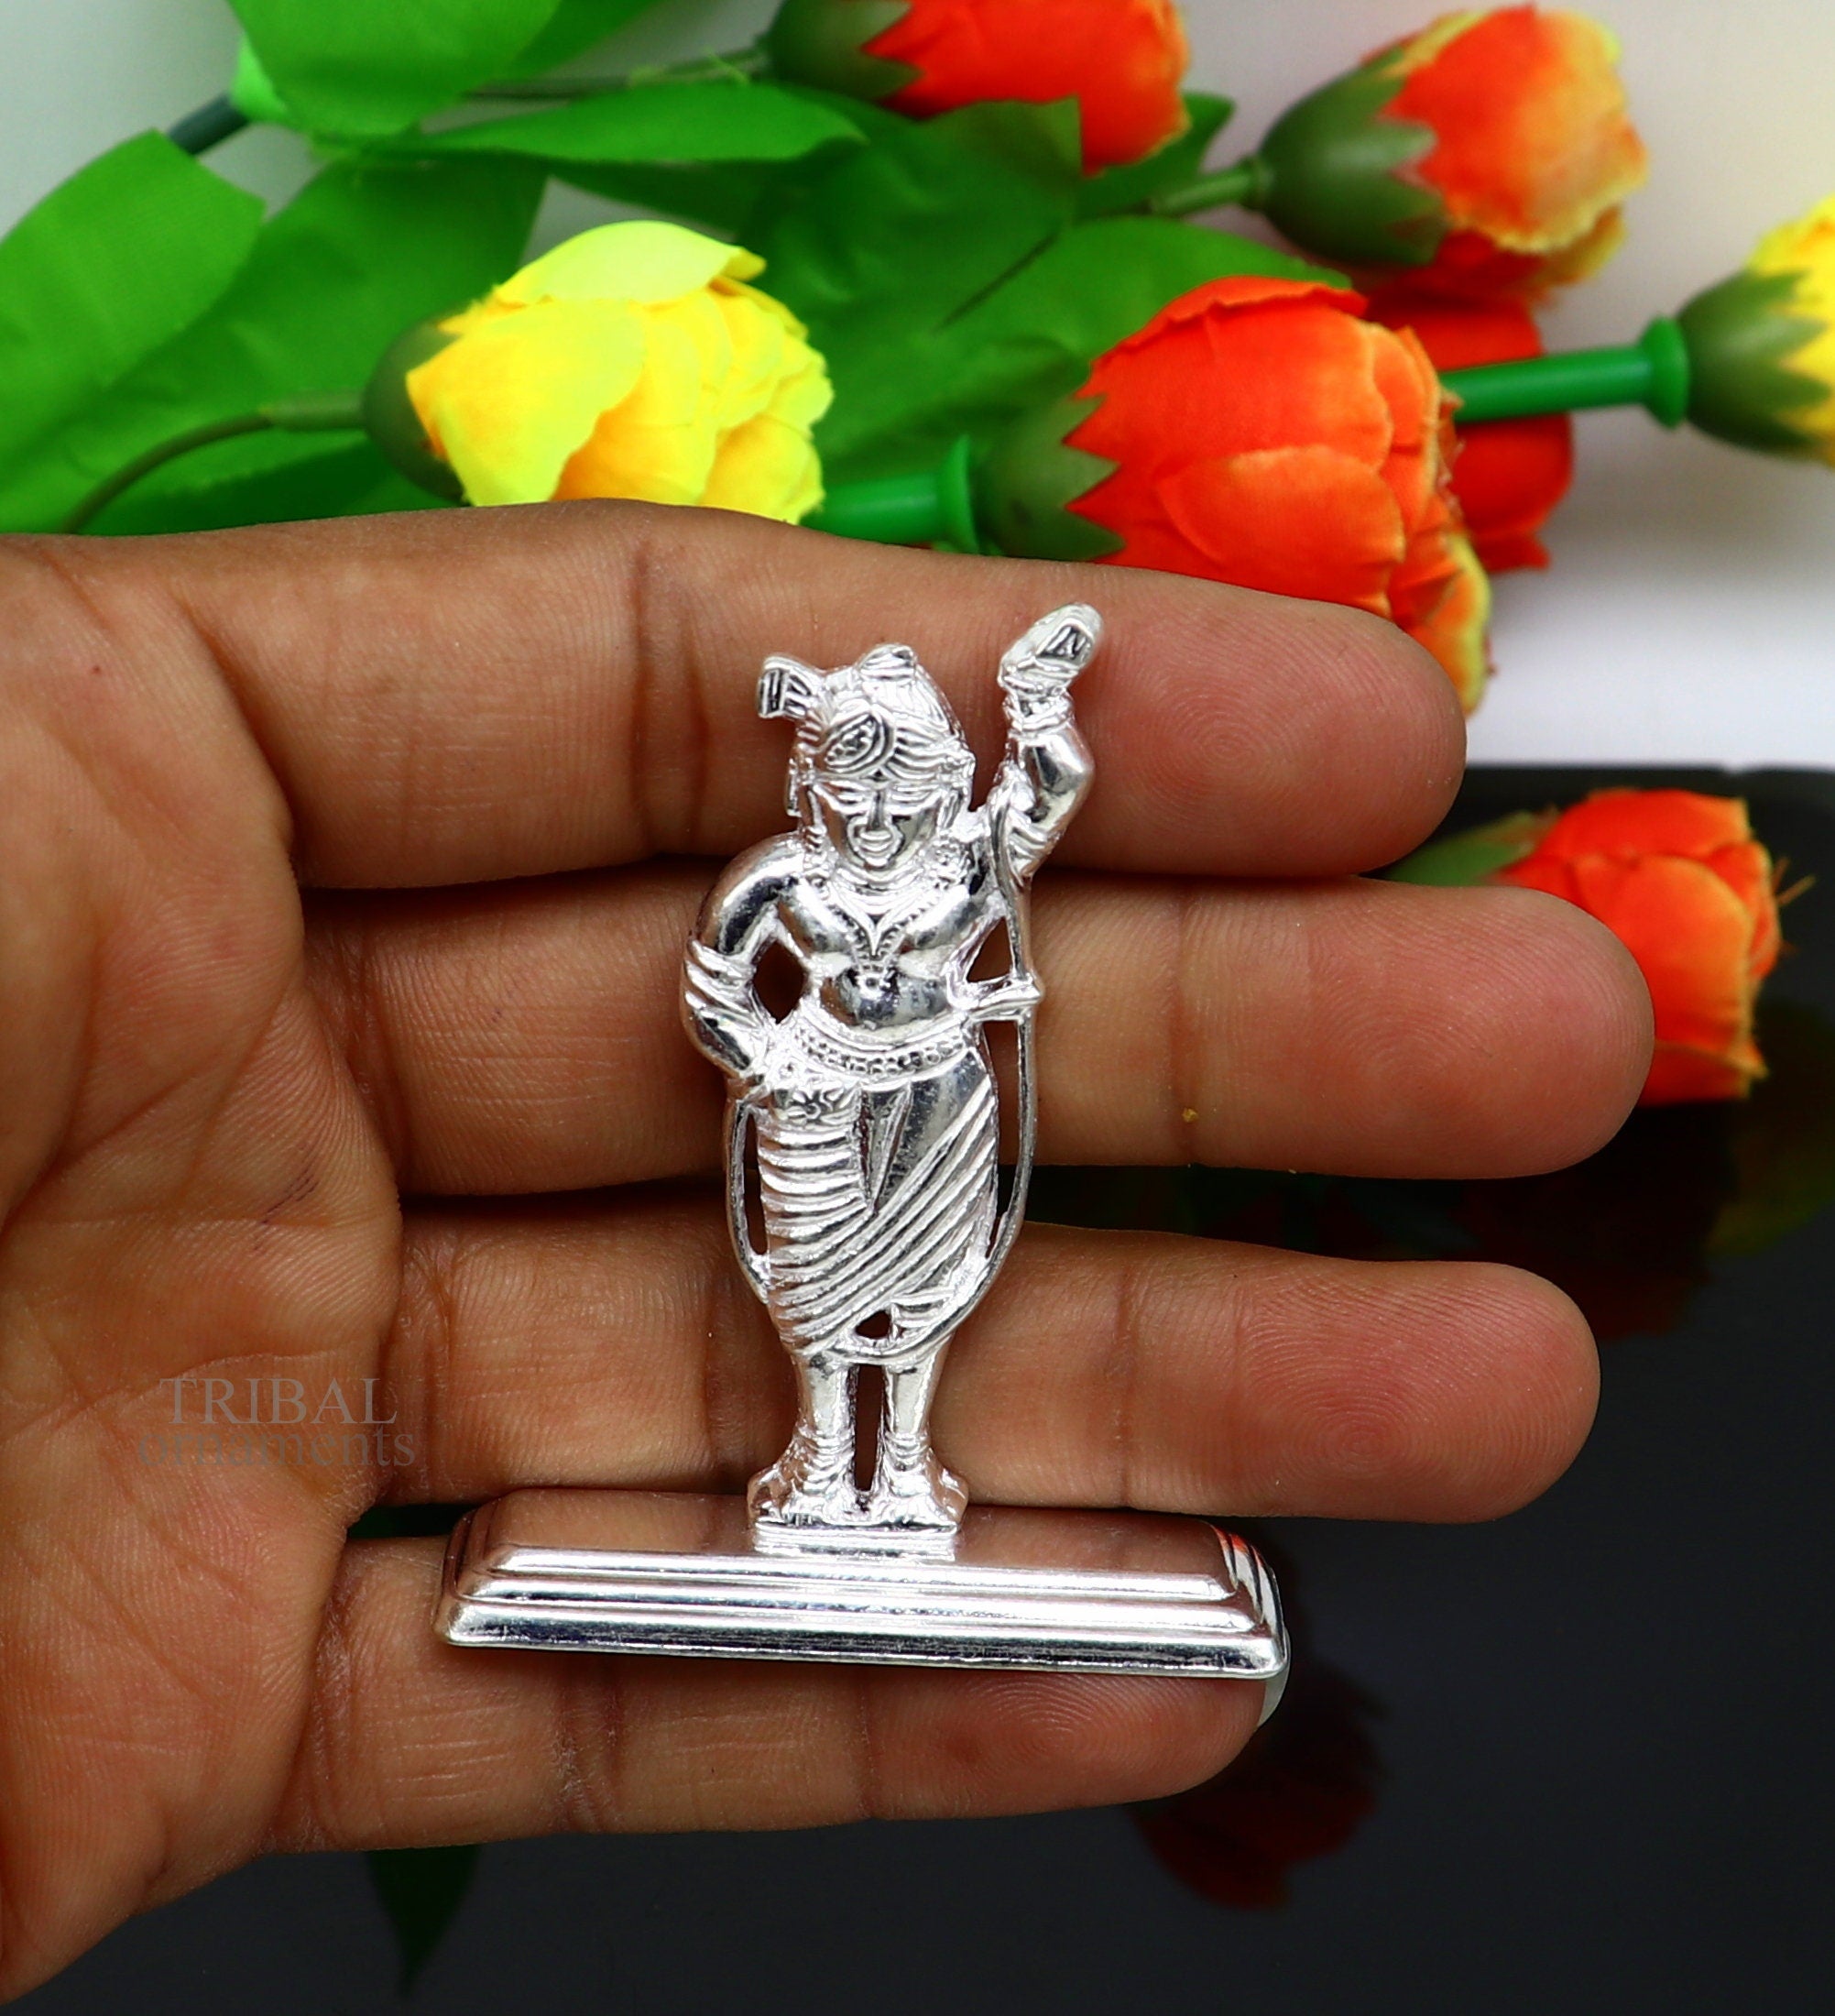 KridayKraft Lord Krishna Metal Statue,Krishna Murti Playing Flute for Puja  Room & Decor your Home,Office & Gift Your Relatives on  Diwali,Wedding,Birthday,Gift Article,Return gift… Decorative Showpiece – 23  cm (Metal, Gold) | |